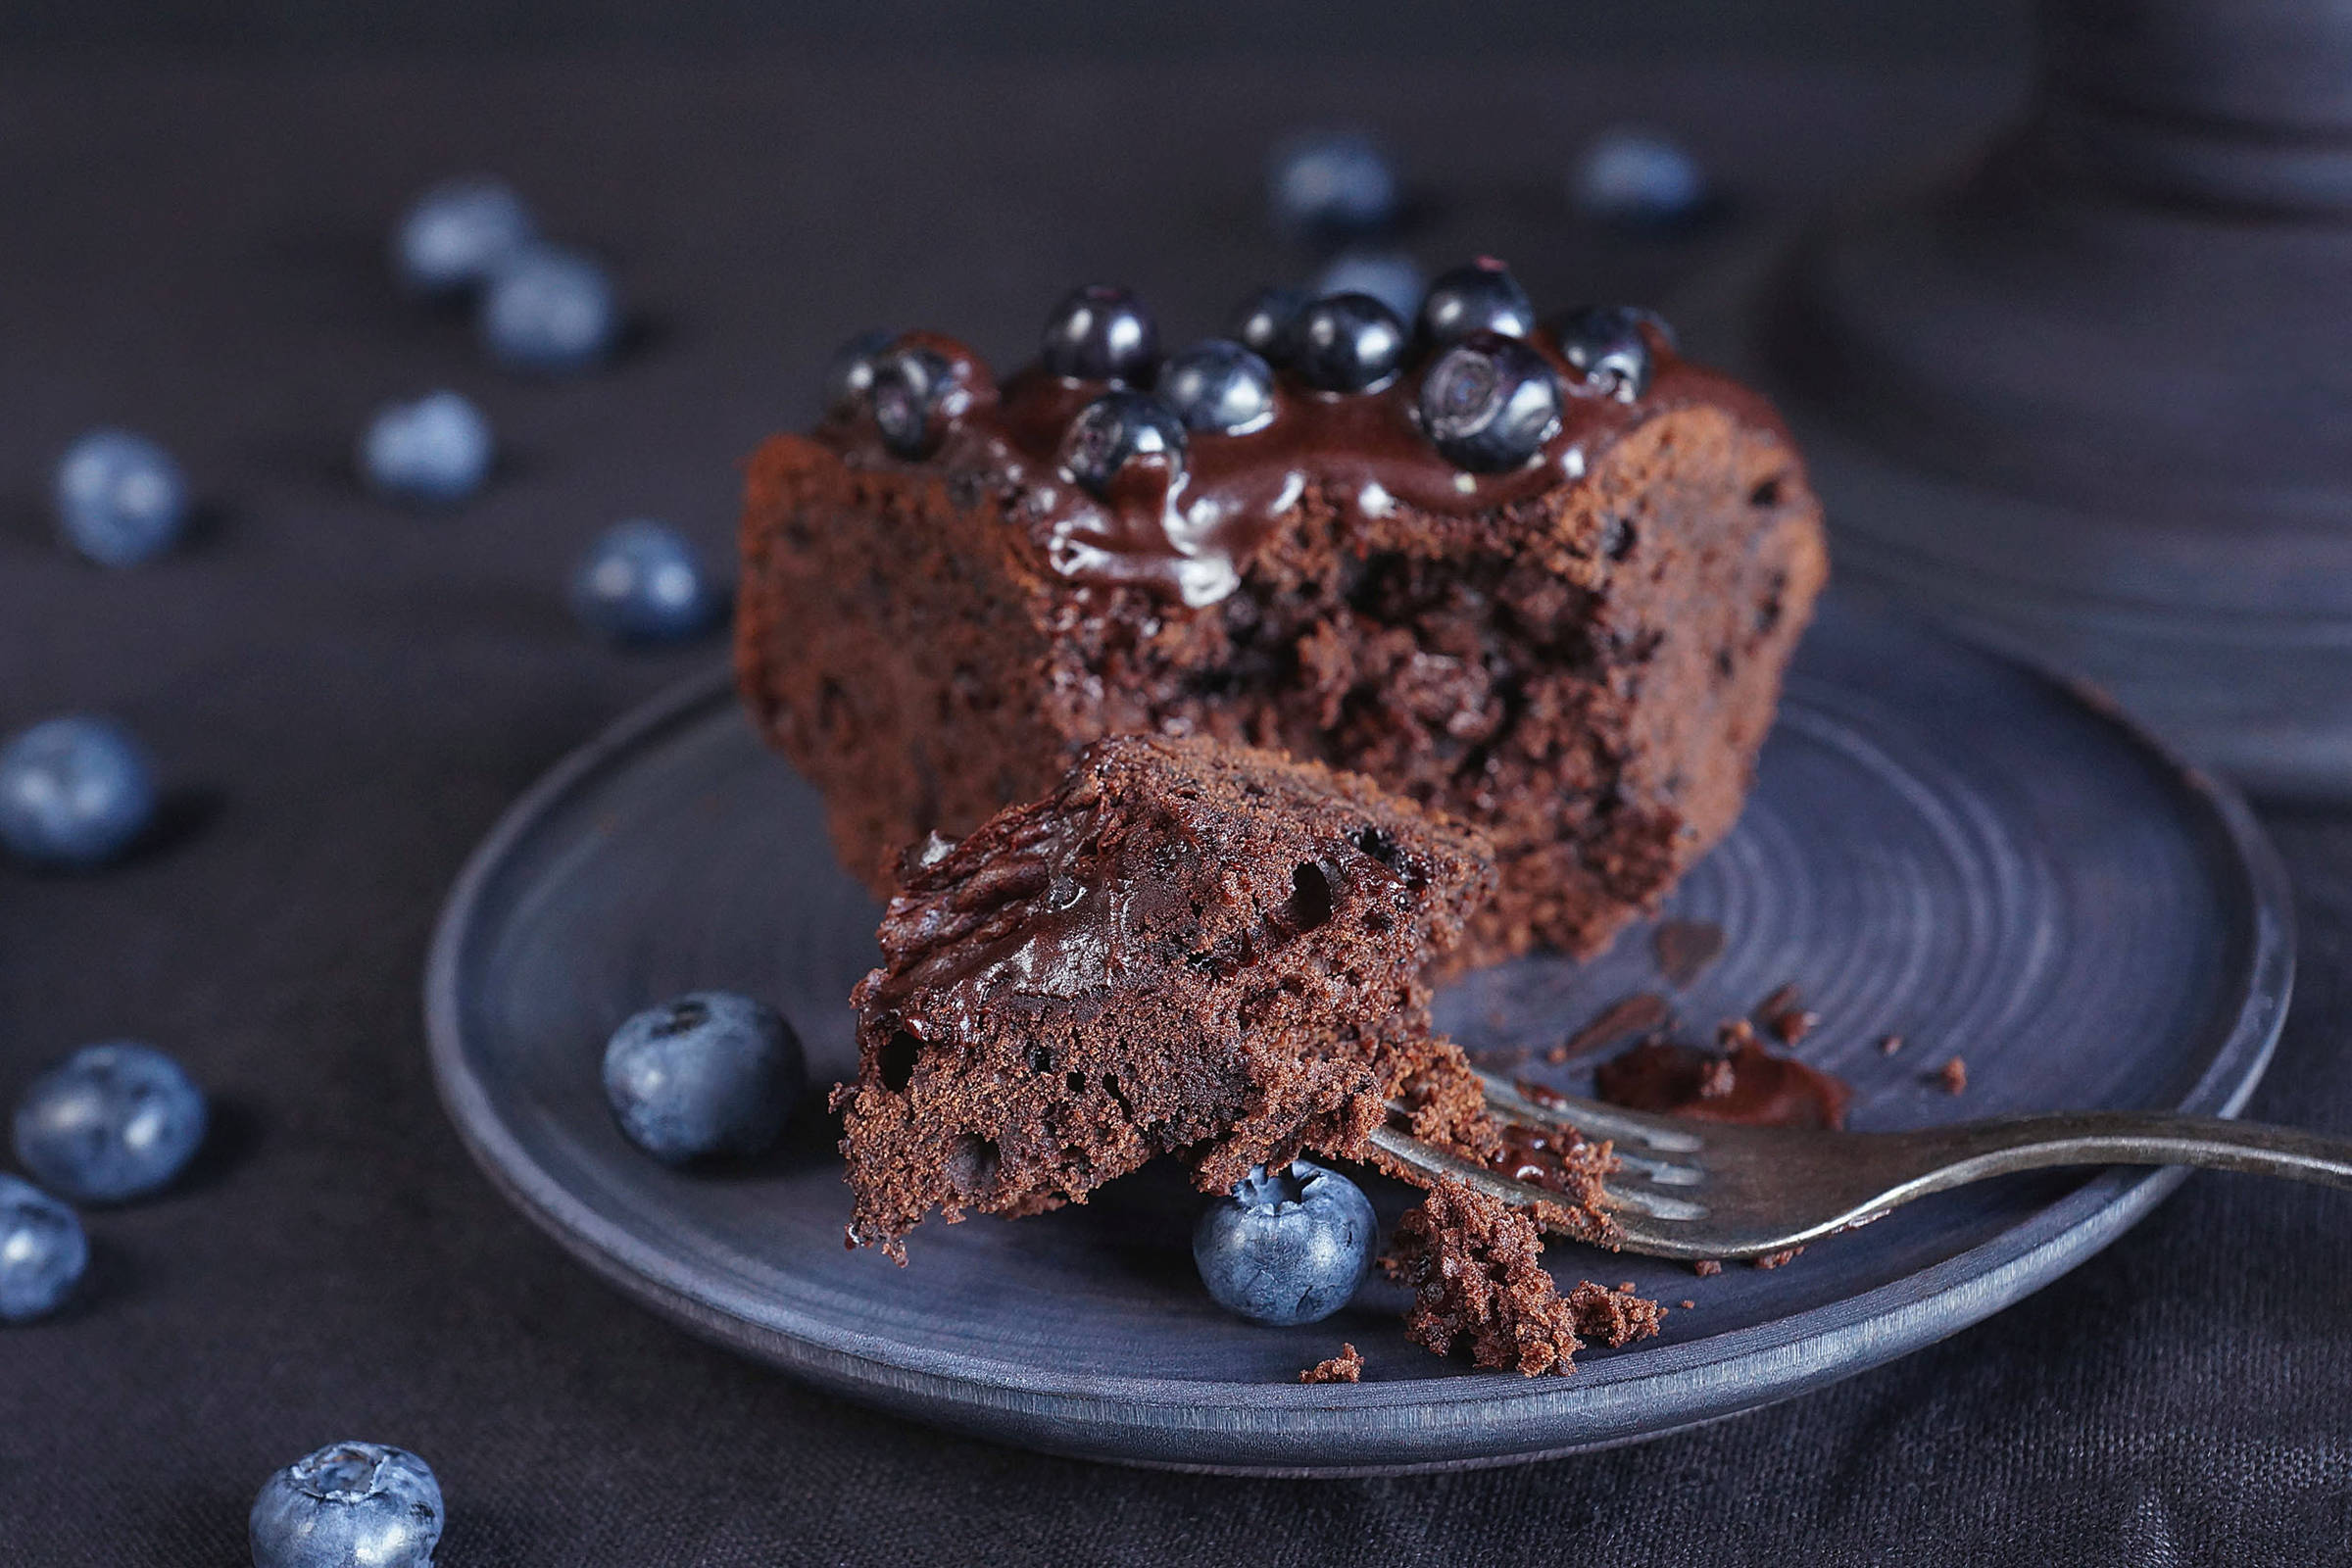 Slice of blueberry chocolate cake on a plate with a fork.